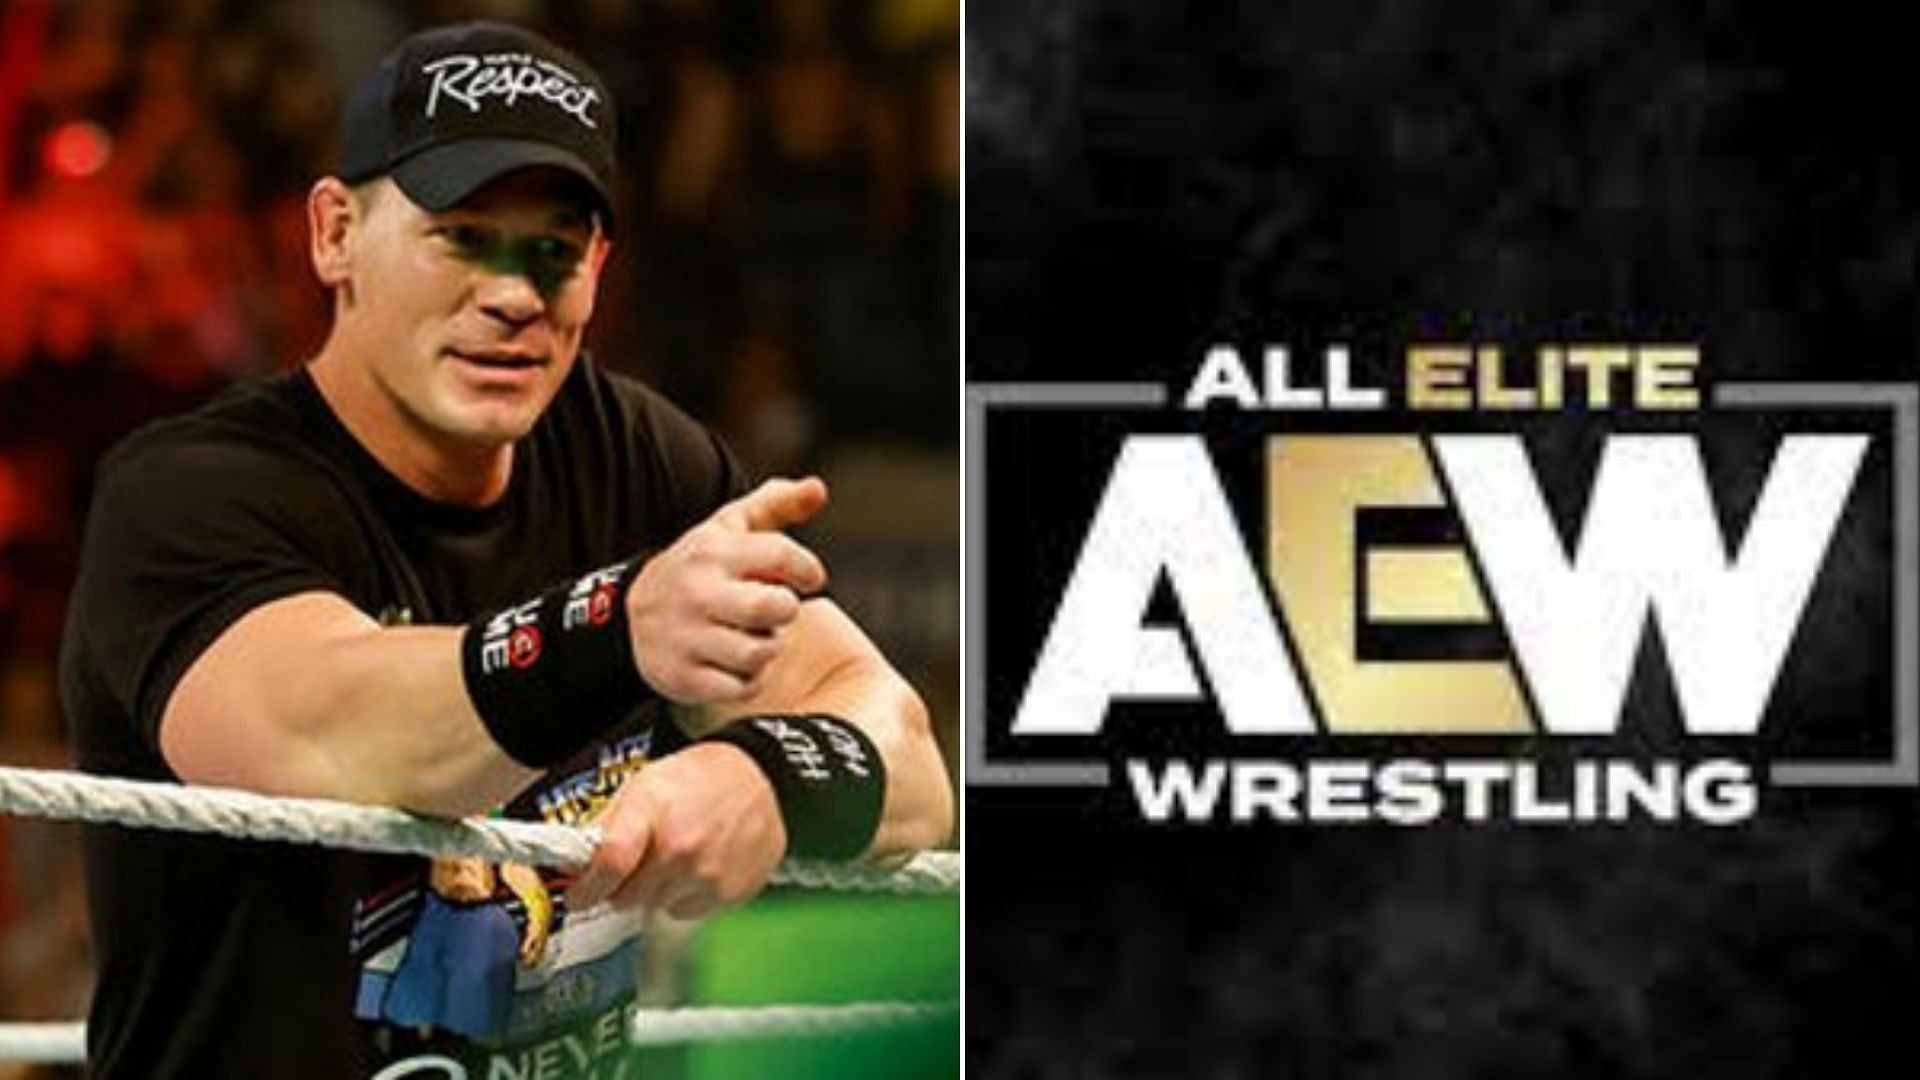 An AEW veteran has looked back on his title feud with Cena